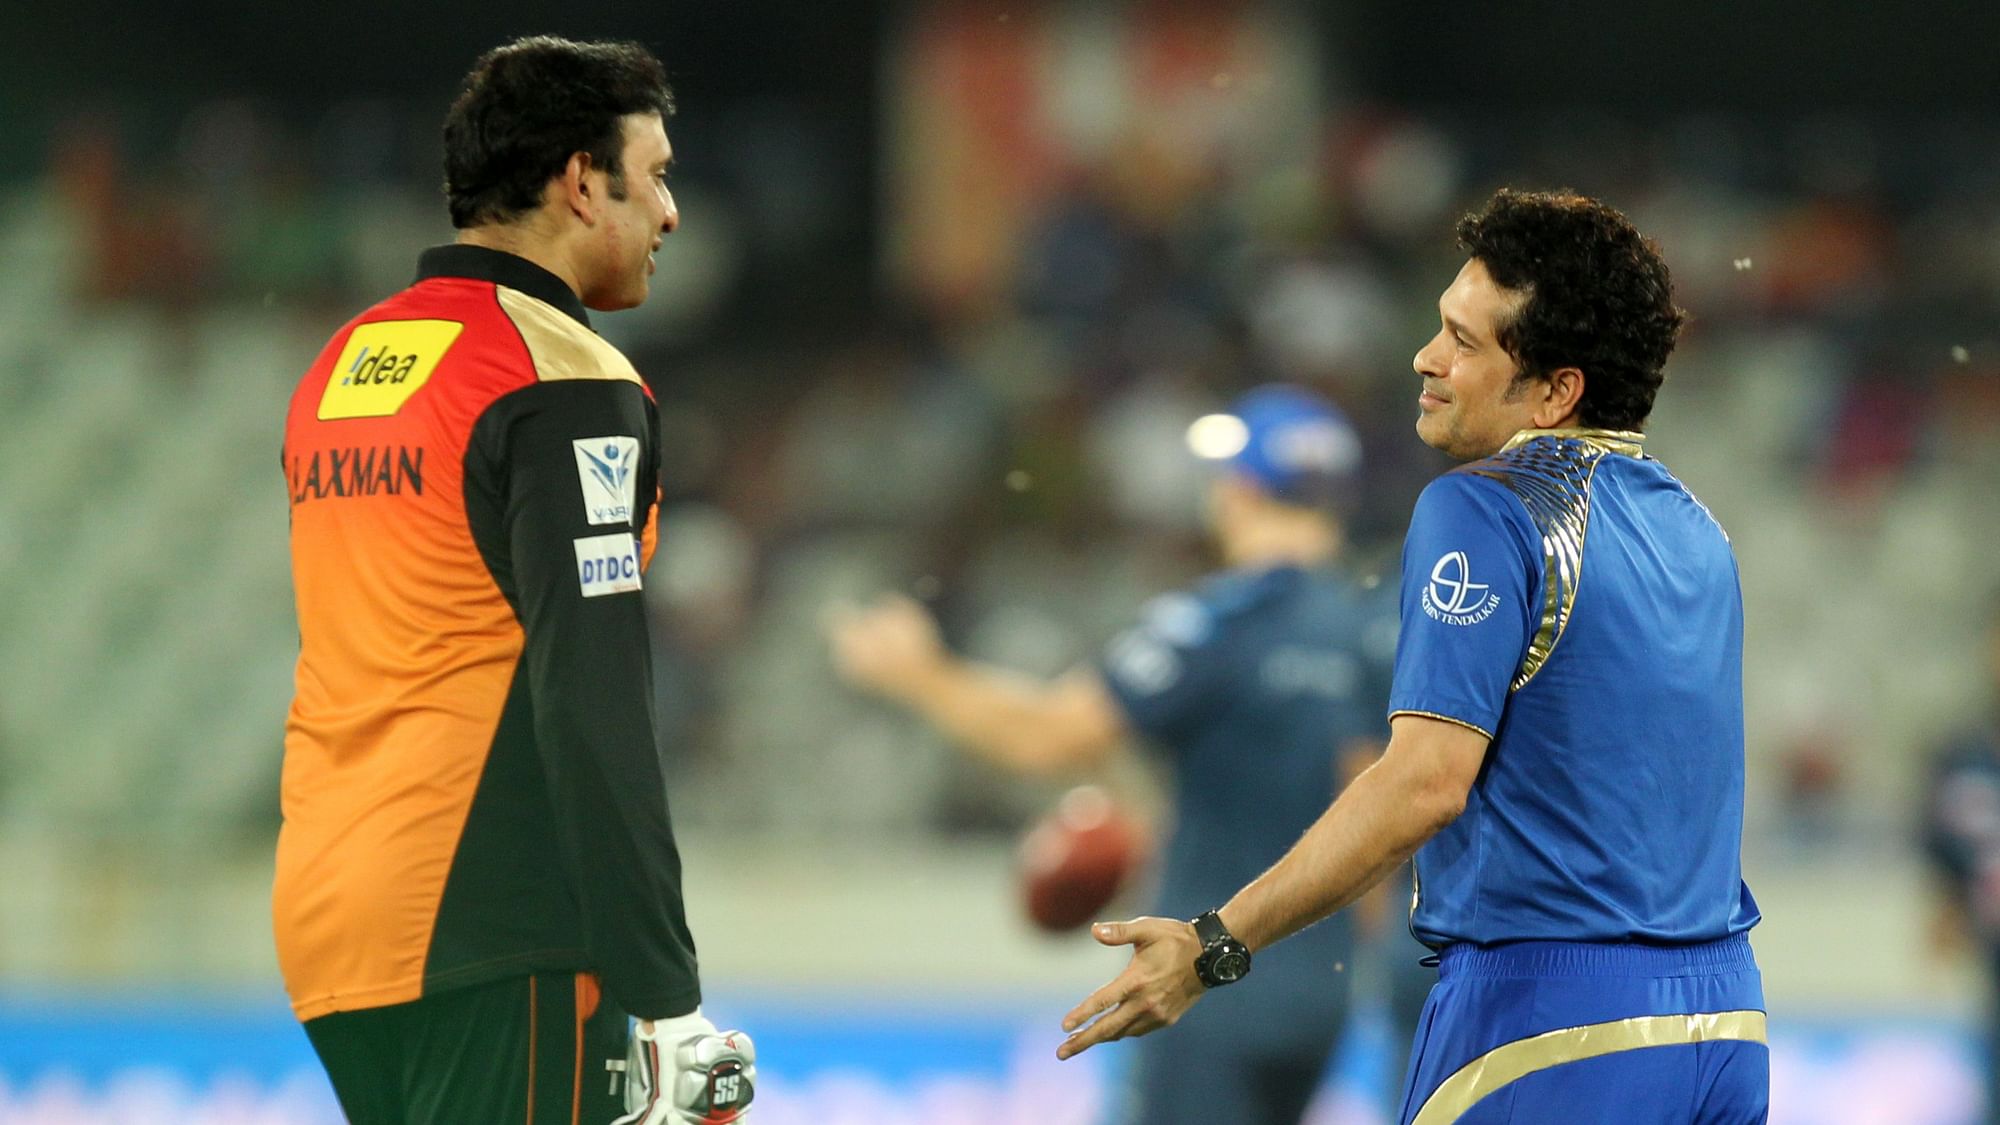 Sachin Tendulkar and VVS Laxman will depose in front of the BCCI Ombudsman regarding Conflict of Interest claims on 14 May.